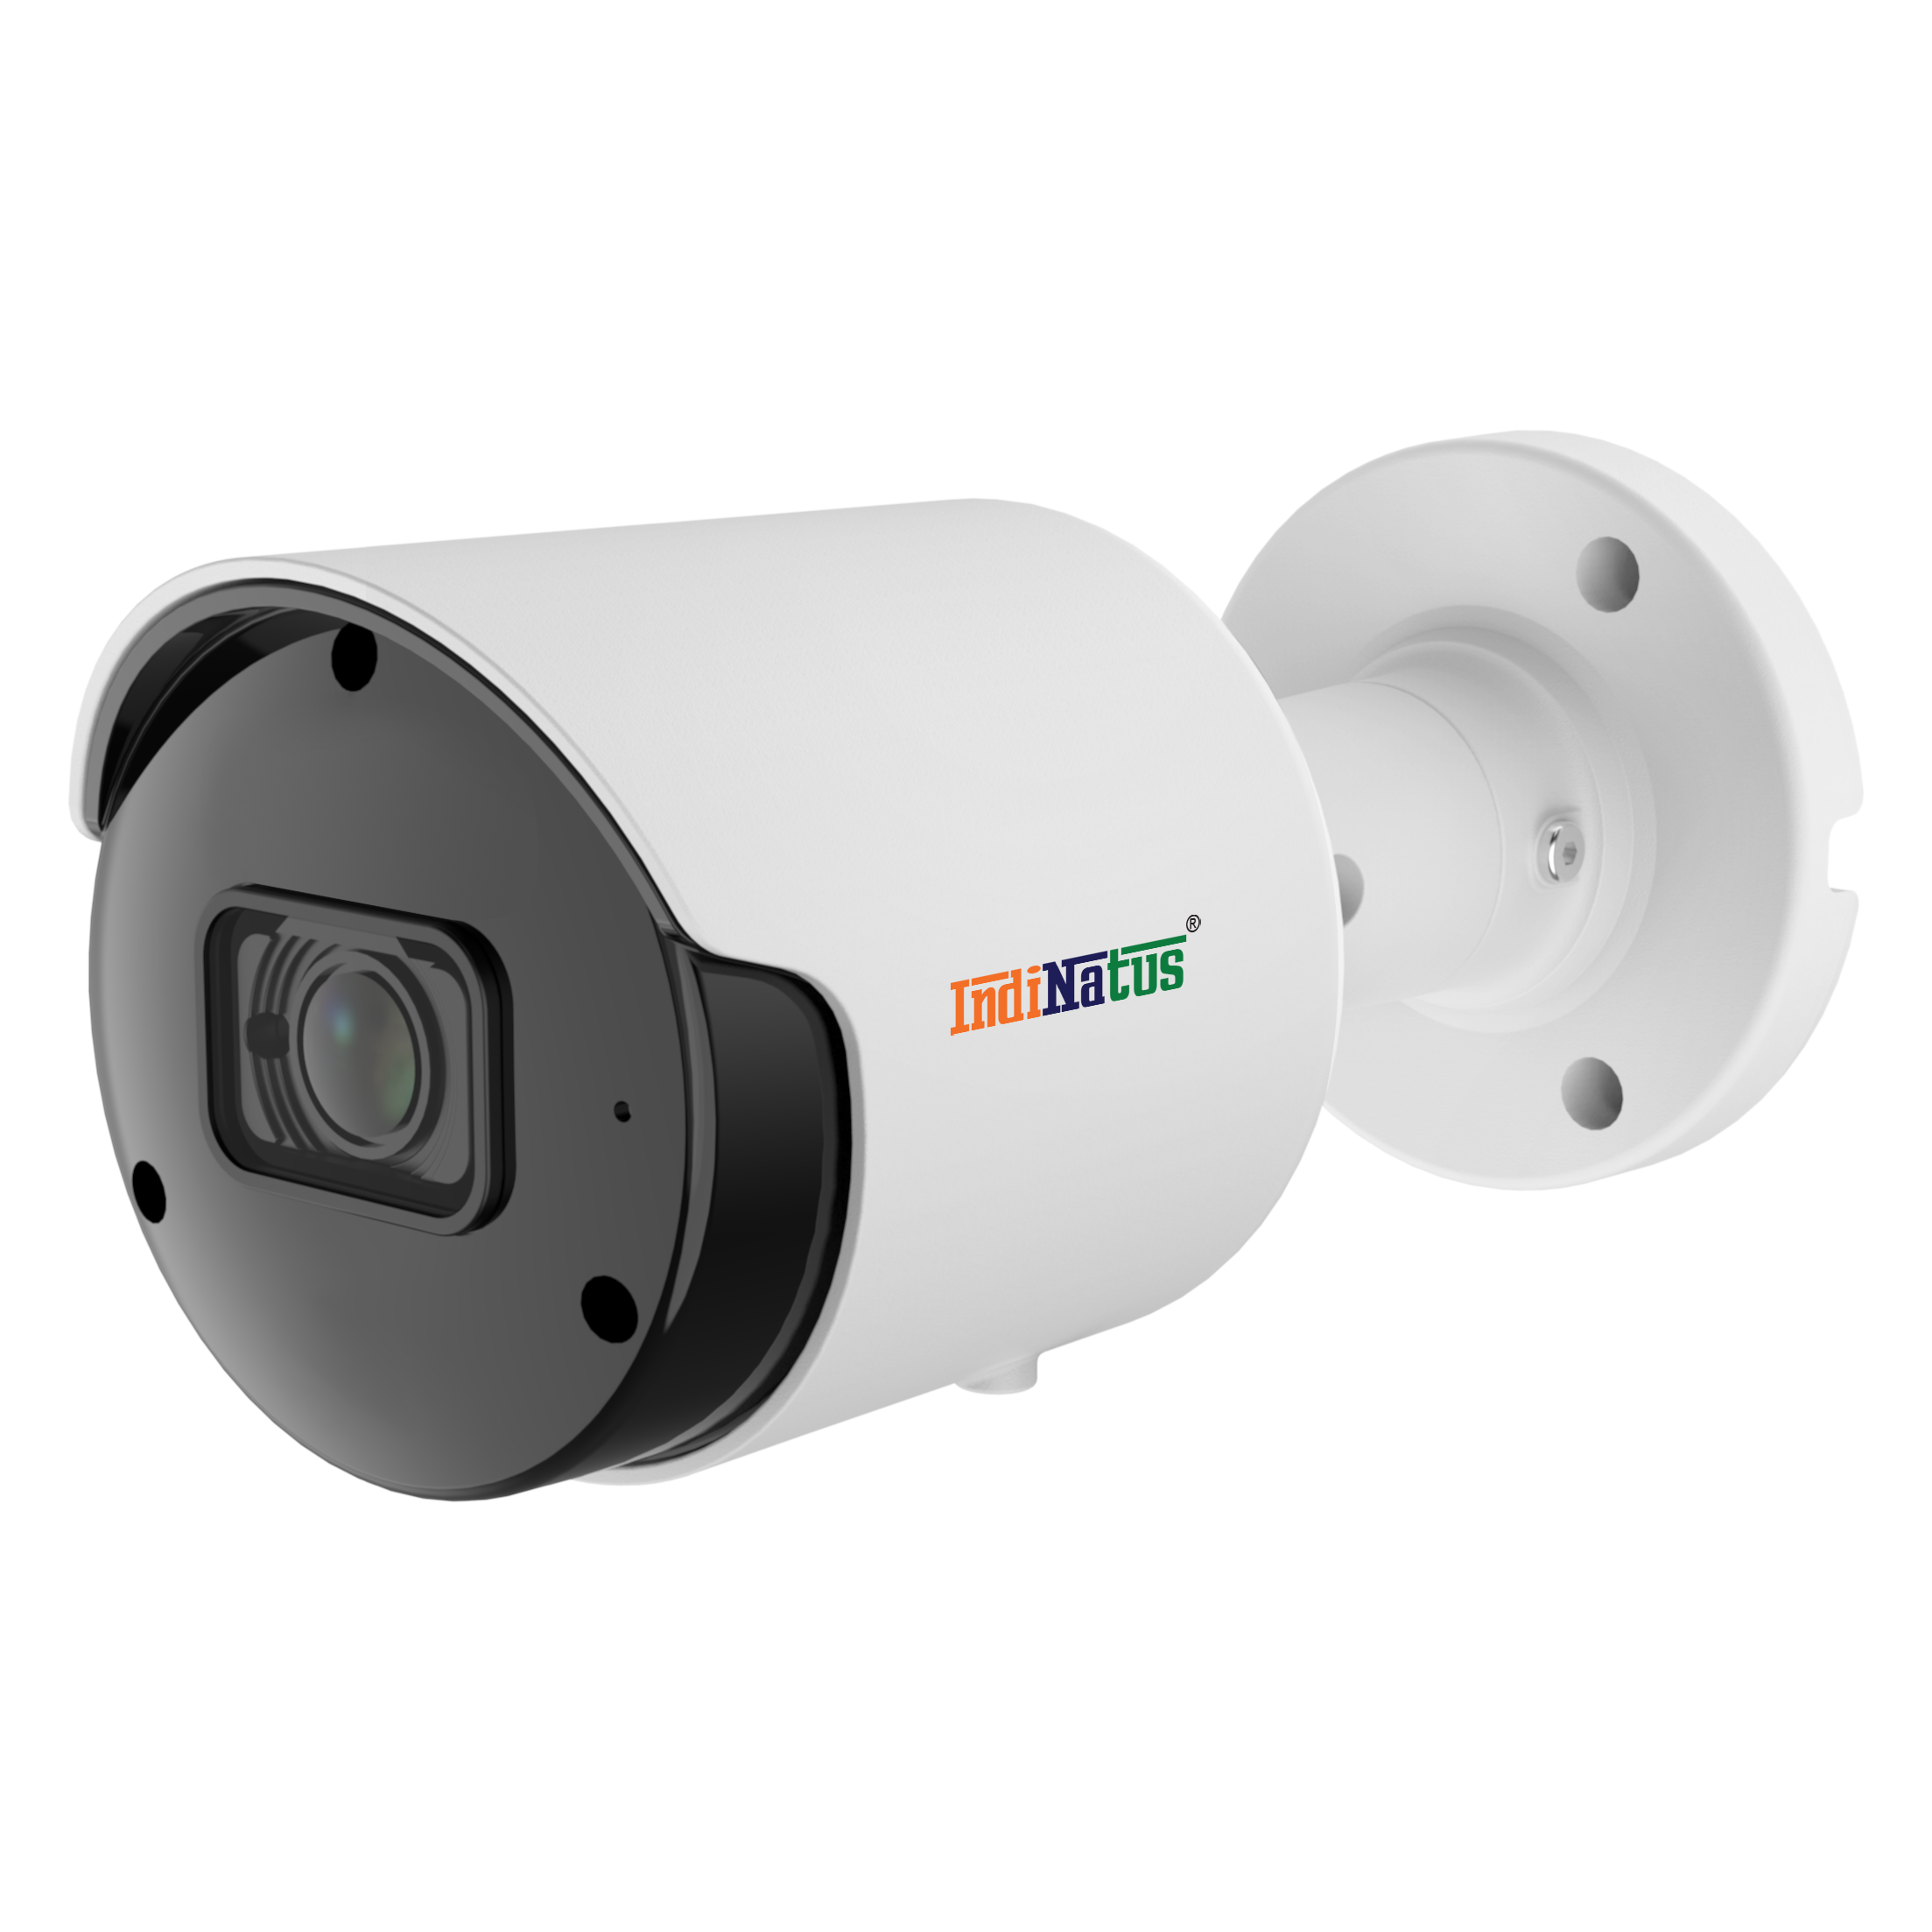 IN-IPC3F22P-I5USD, 2-Megapixel IR & WDR, Outdoor Fixed IP Bullet Camera IndiNatus® India Private Limited - India Ka Apna Brand, Indian CCTV  Brand,  Make In India CCTV camera, Make in india cctv camera brand available on gem portal, IP Network Camera, Indian brand CCTV Camera 